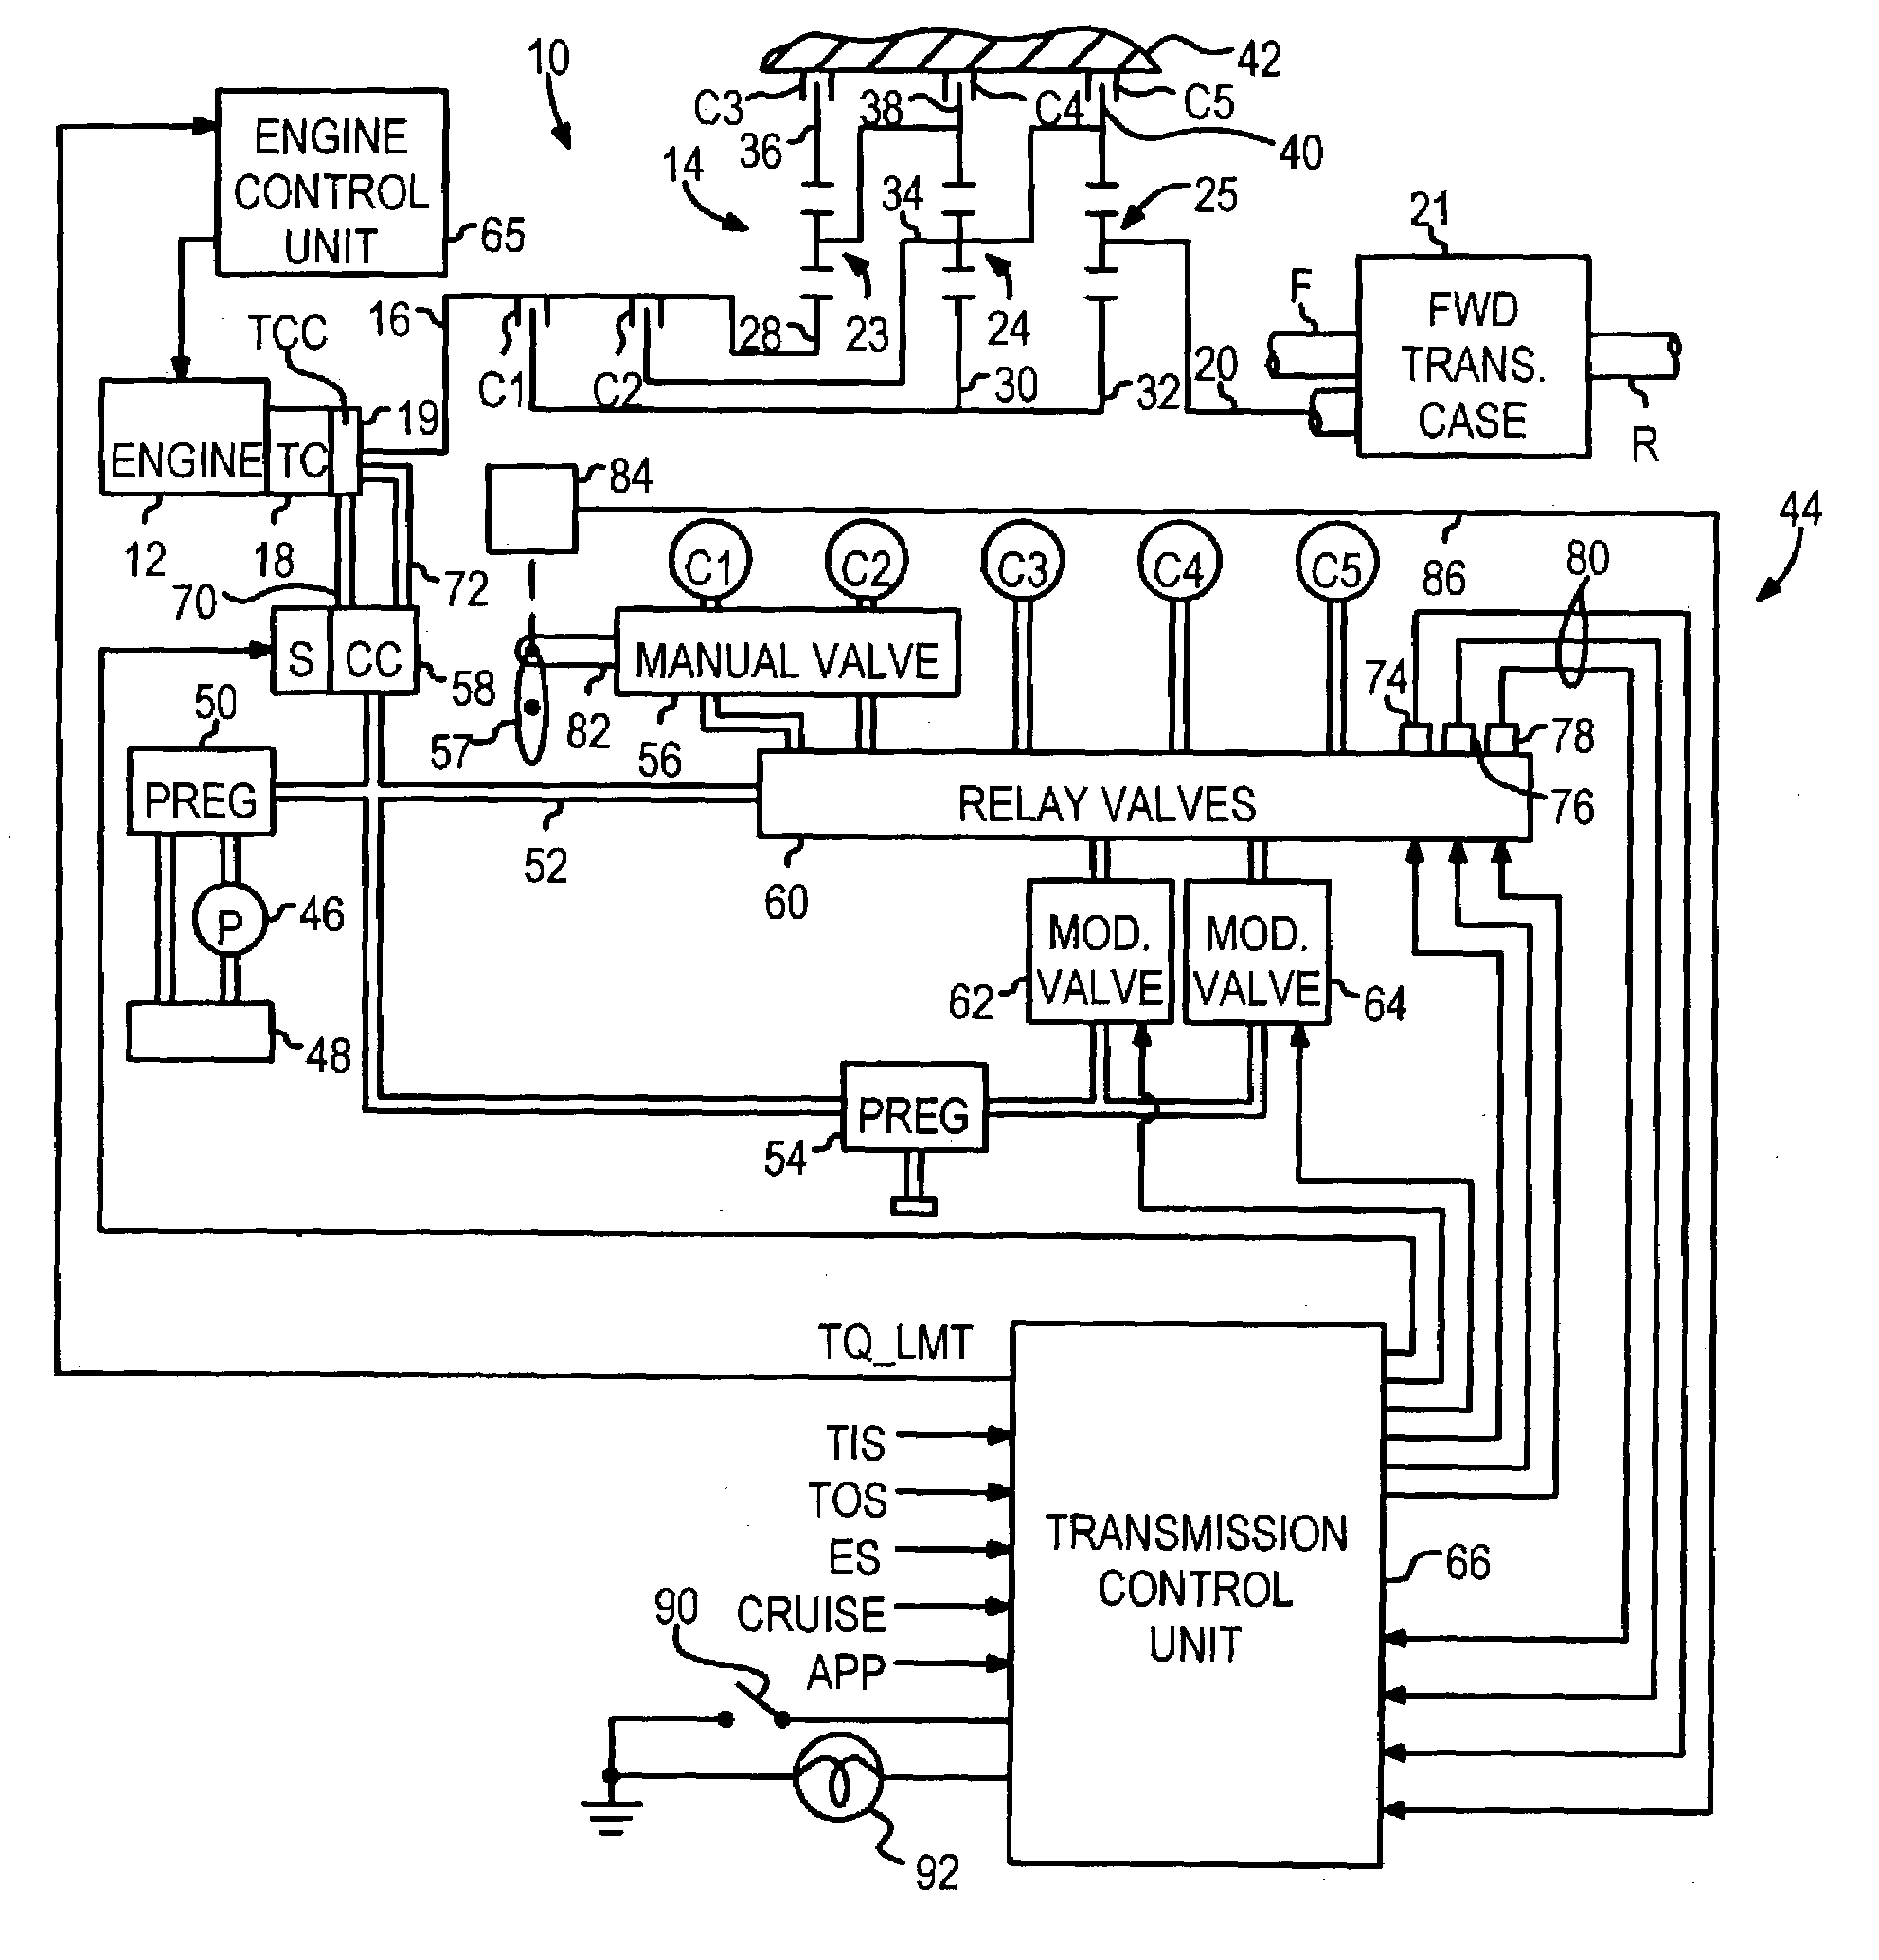 Motor vehicle powertrain control method for low traction conditions